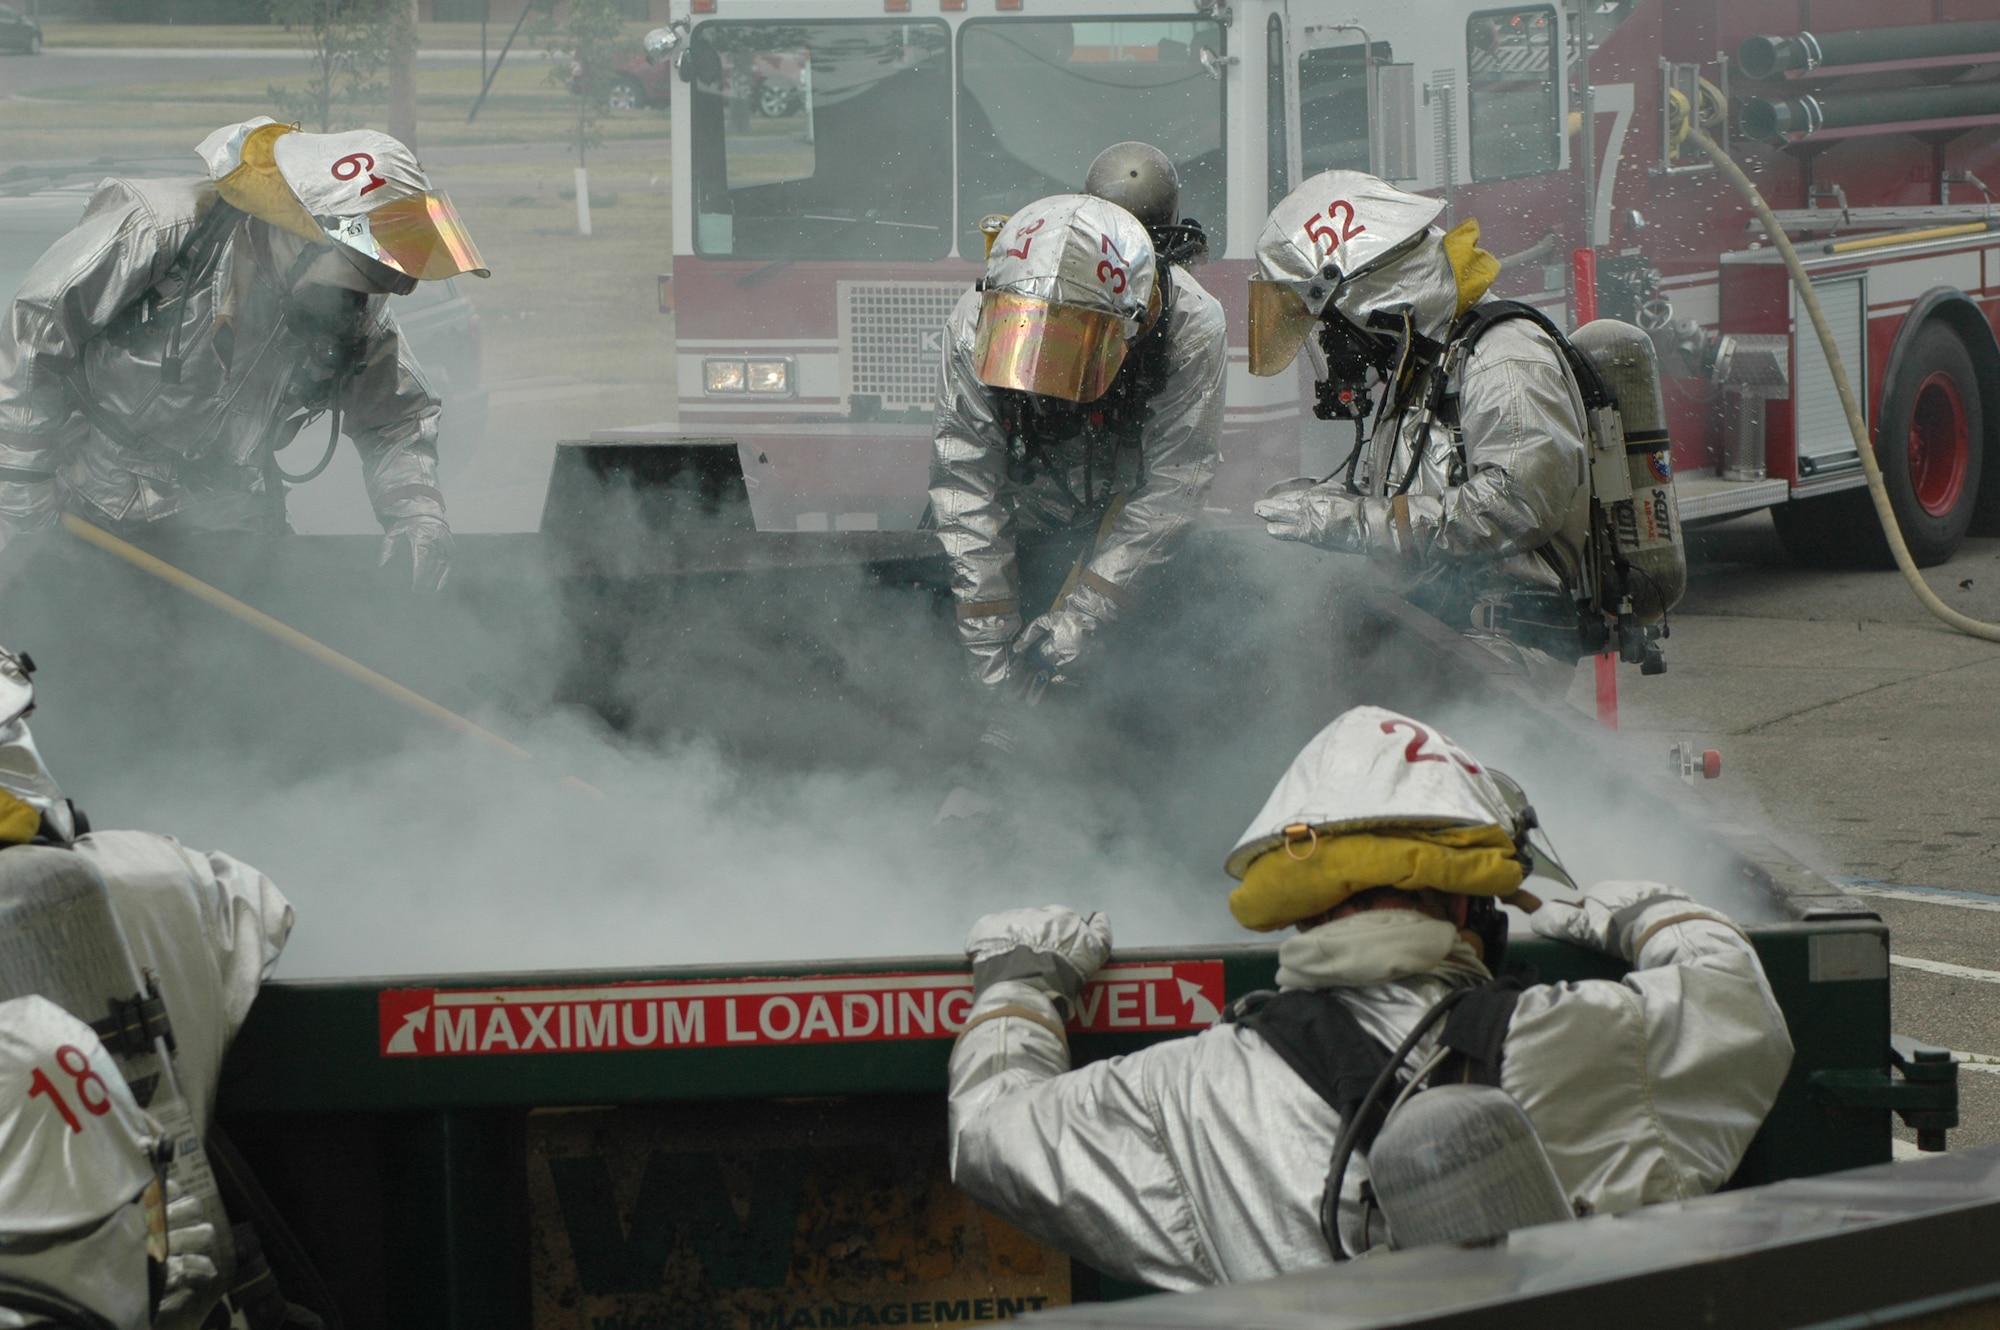 MINOT AIR FORCE BASE, N.D. -- Airmen from the 5th Civil Engineer Squadron fire protection flight, extinguish a fire in a trash dumpster in front of the PRIDE building here July 21. Airmen responded to the fire within one minute after receiving the 911 call. (U.S. Air Force photo by Capt. James Breessendorf.)